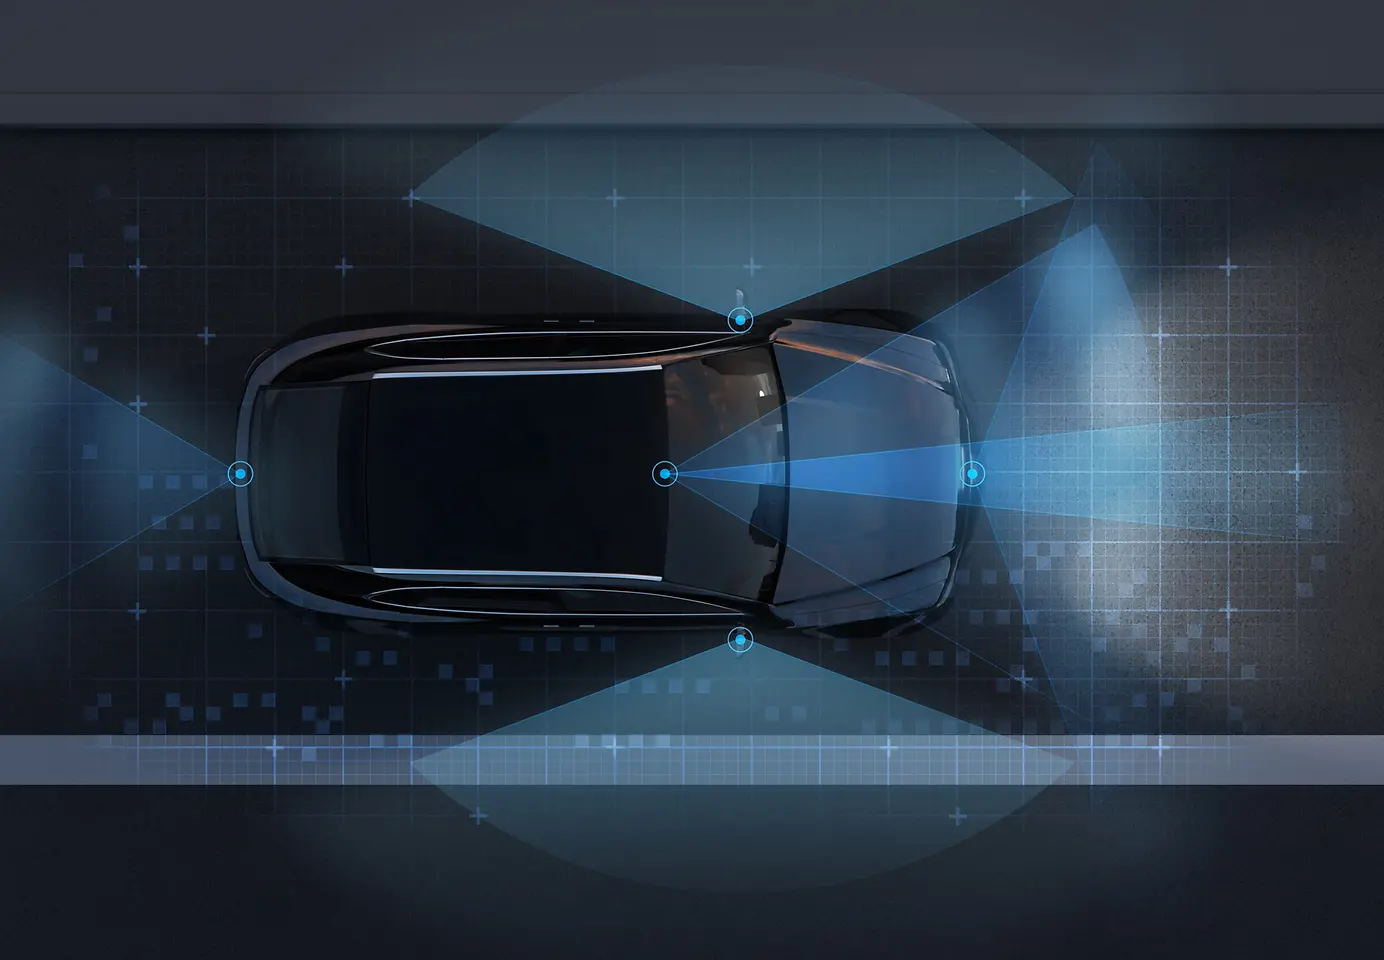 
As a longstanding partner to the automotive industry, Henkel is continuing to develop new adhesives for high-resolution camera designs that can focus with ever greater accuracy.